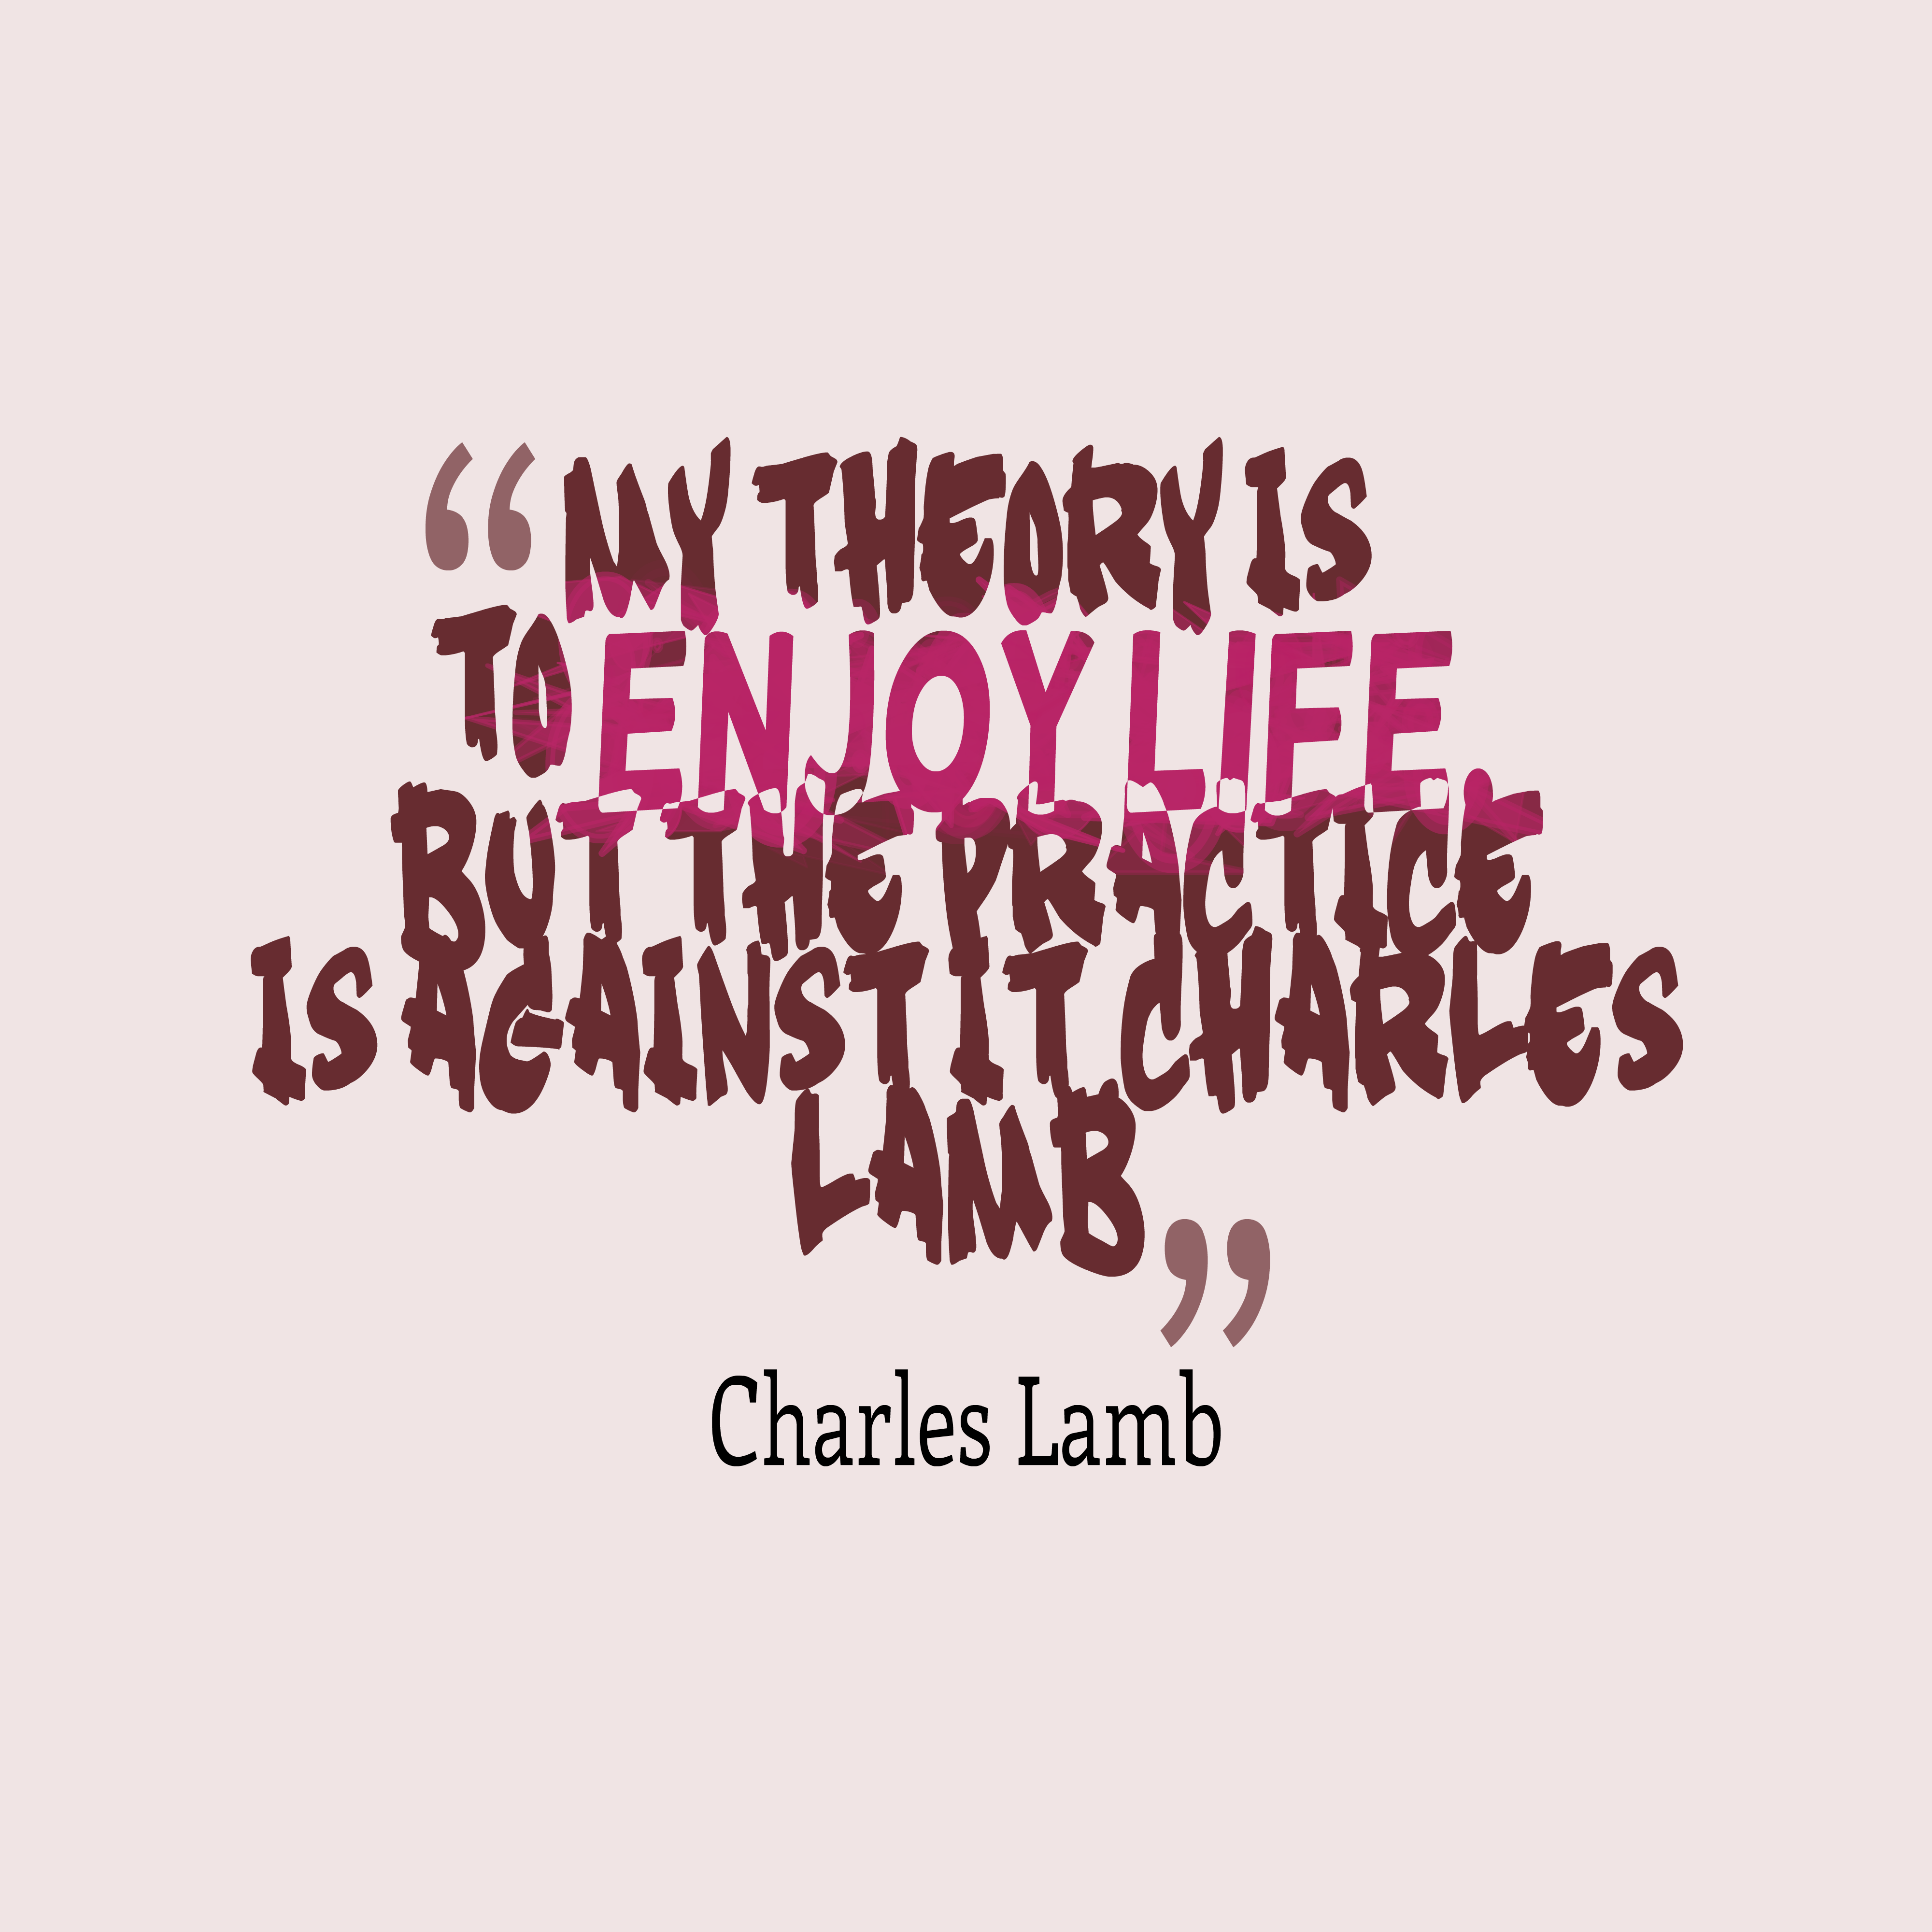 My theory is to enjoy life, but the practice is against it. Charles Lamb